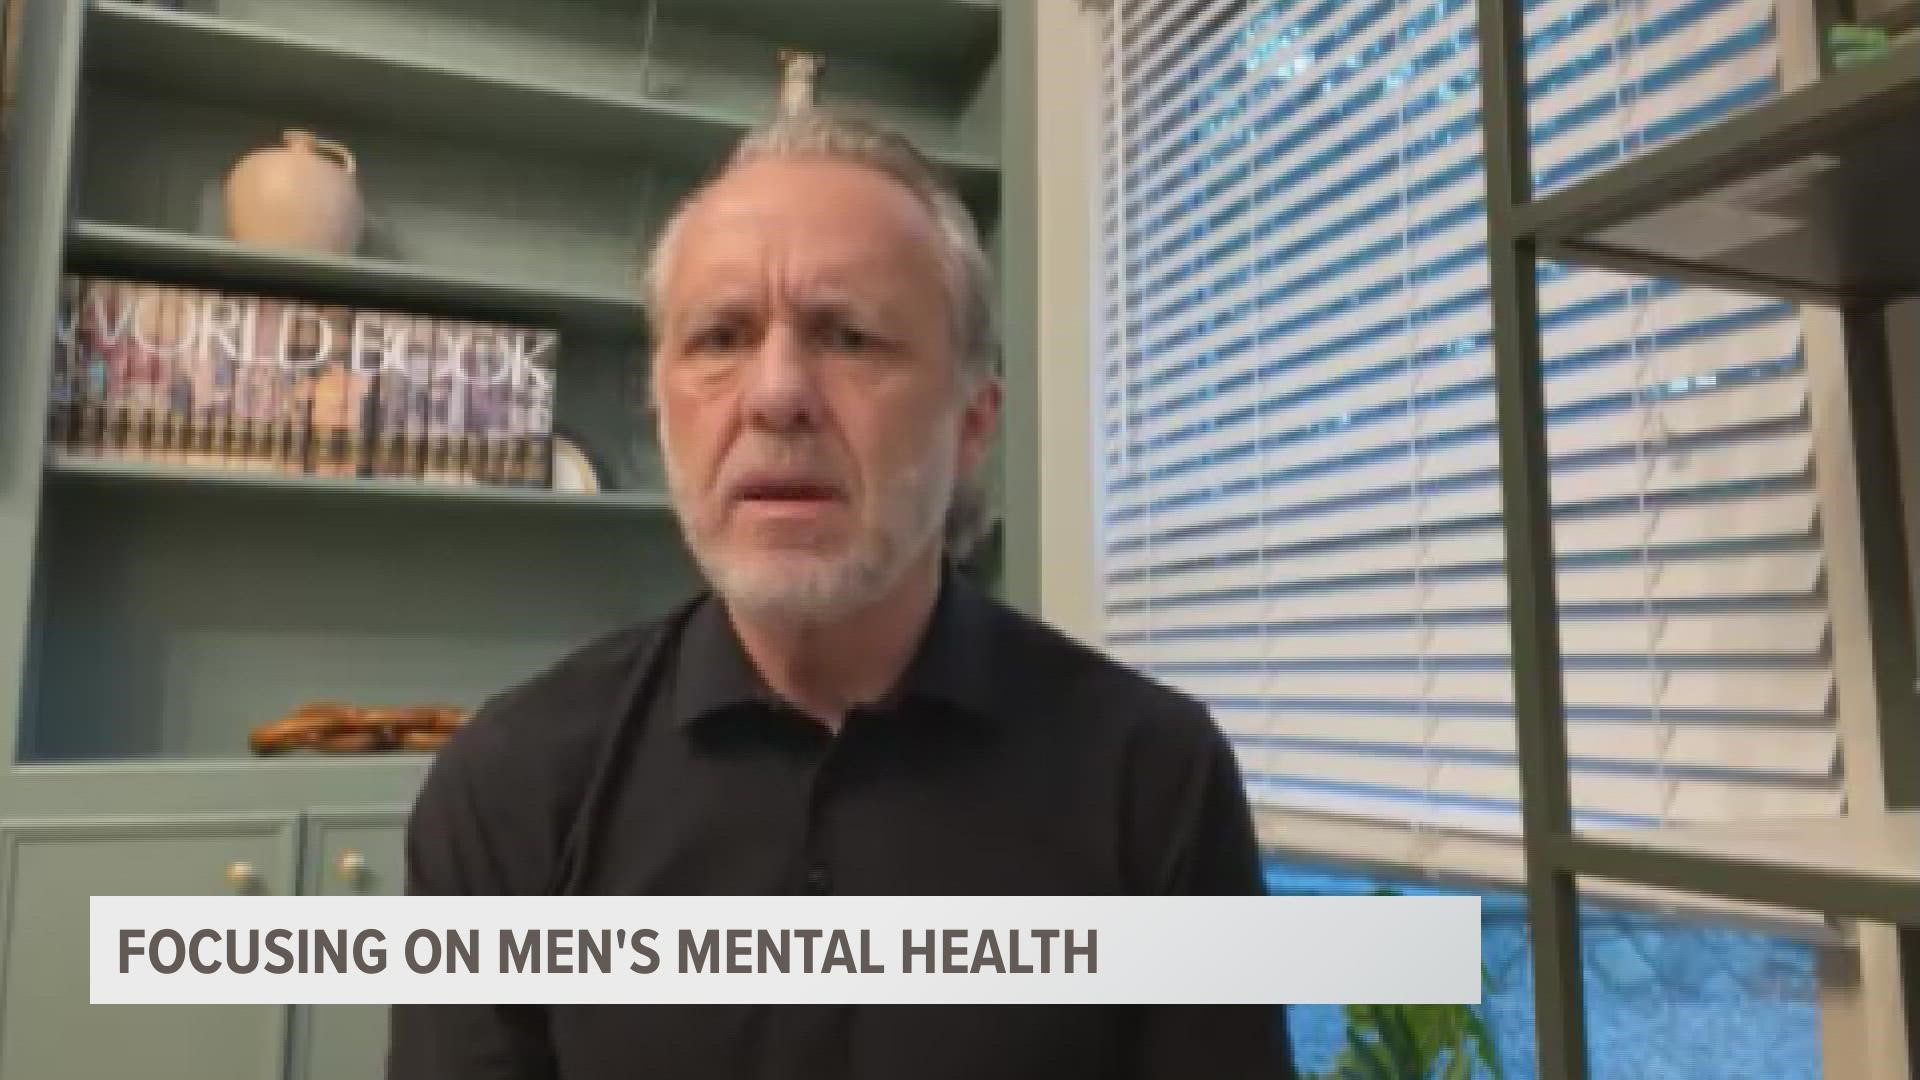 The Men’s Resource Center of West Michigan is helping people improve their mental health.